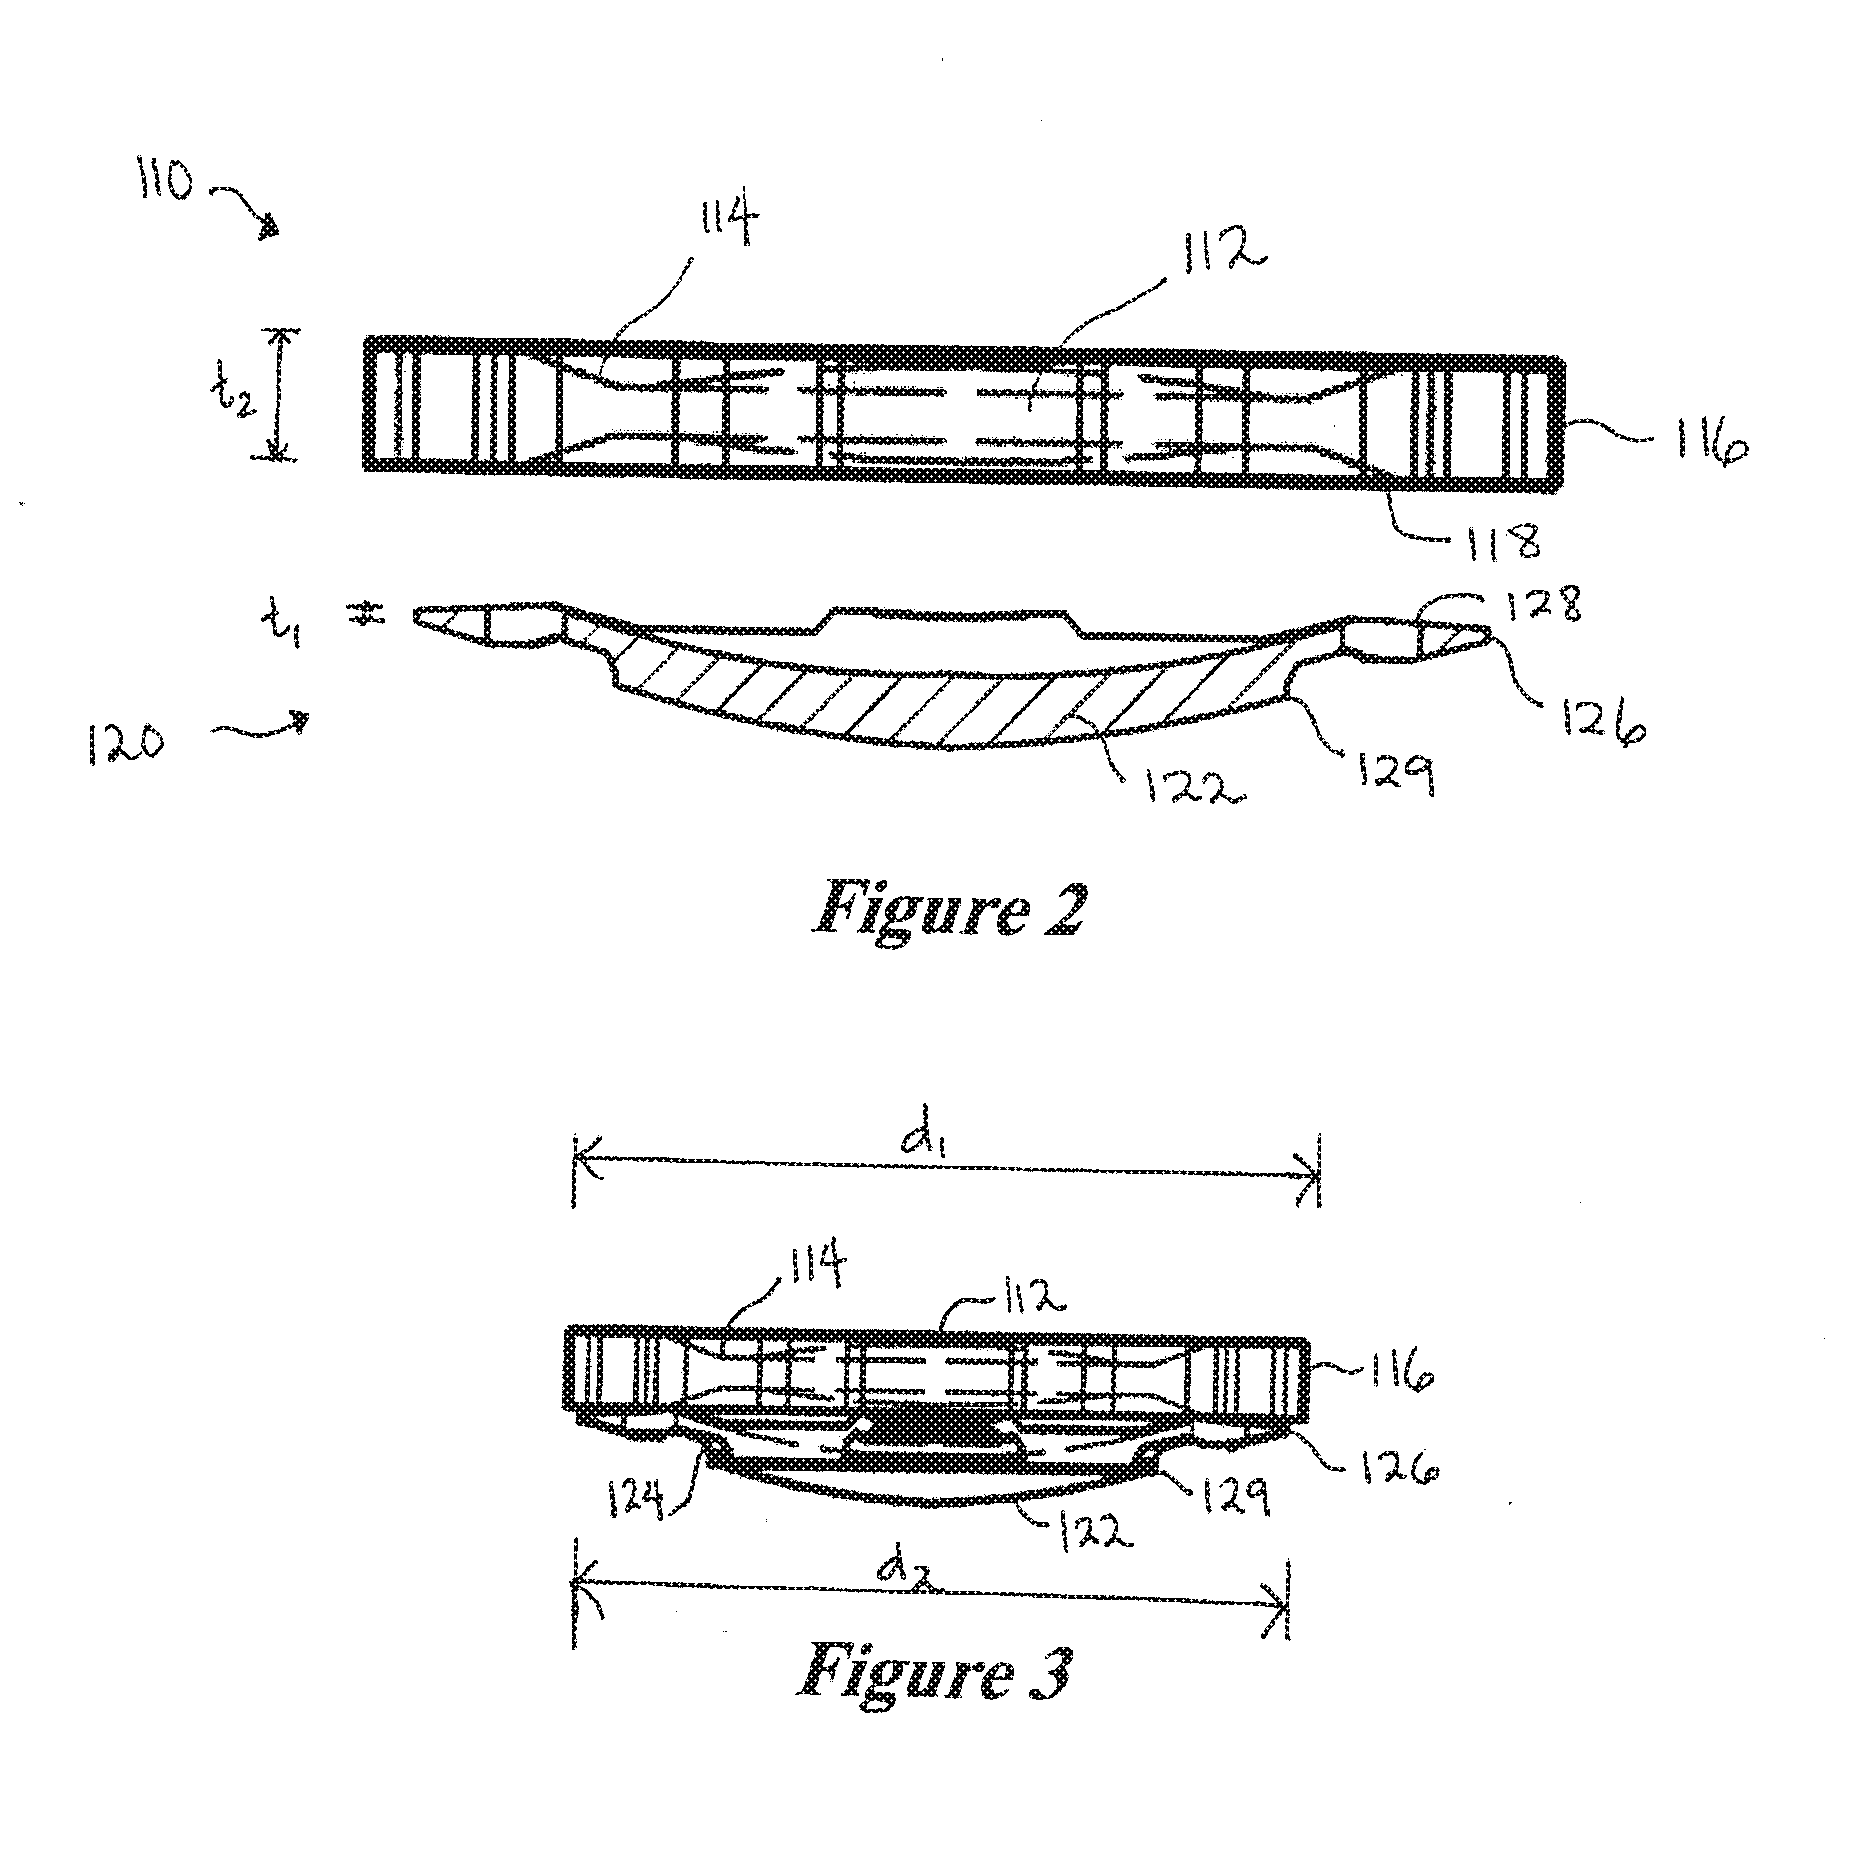 Two-part accommodating intraocular lens device